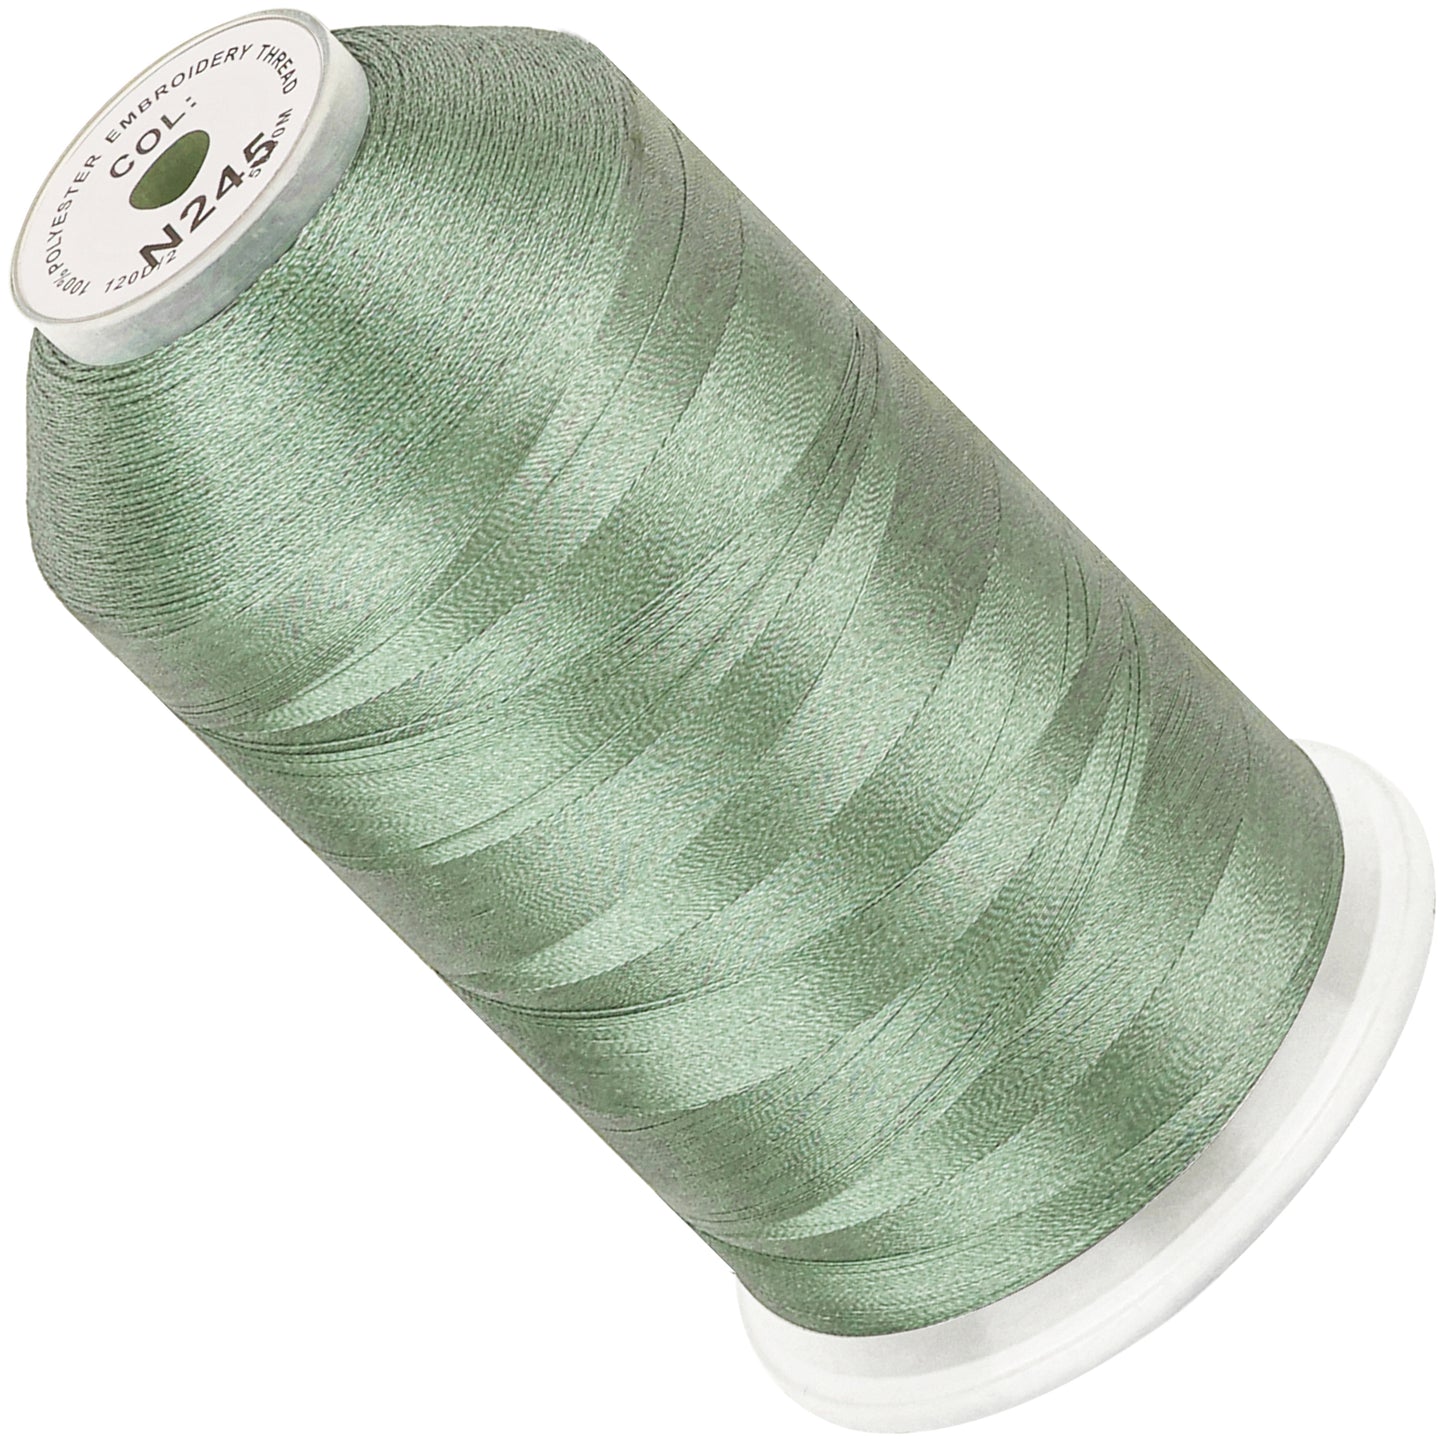 New brothread Single Huge Spool 5000M Each Polyester Embroidery Machine Thread 40WT - Brother Colors + Variegated Colors